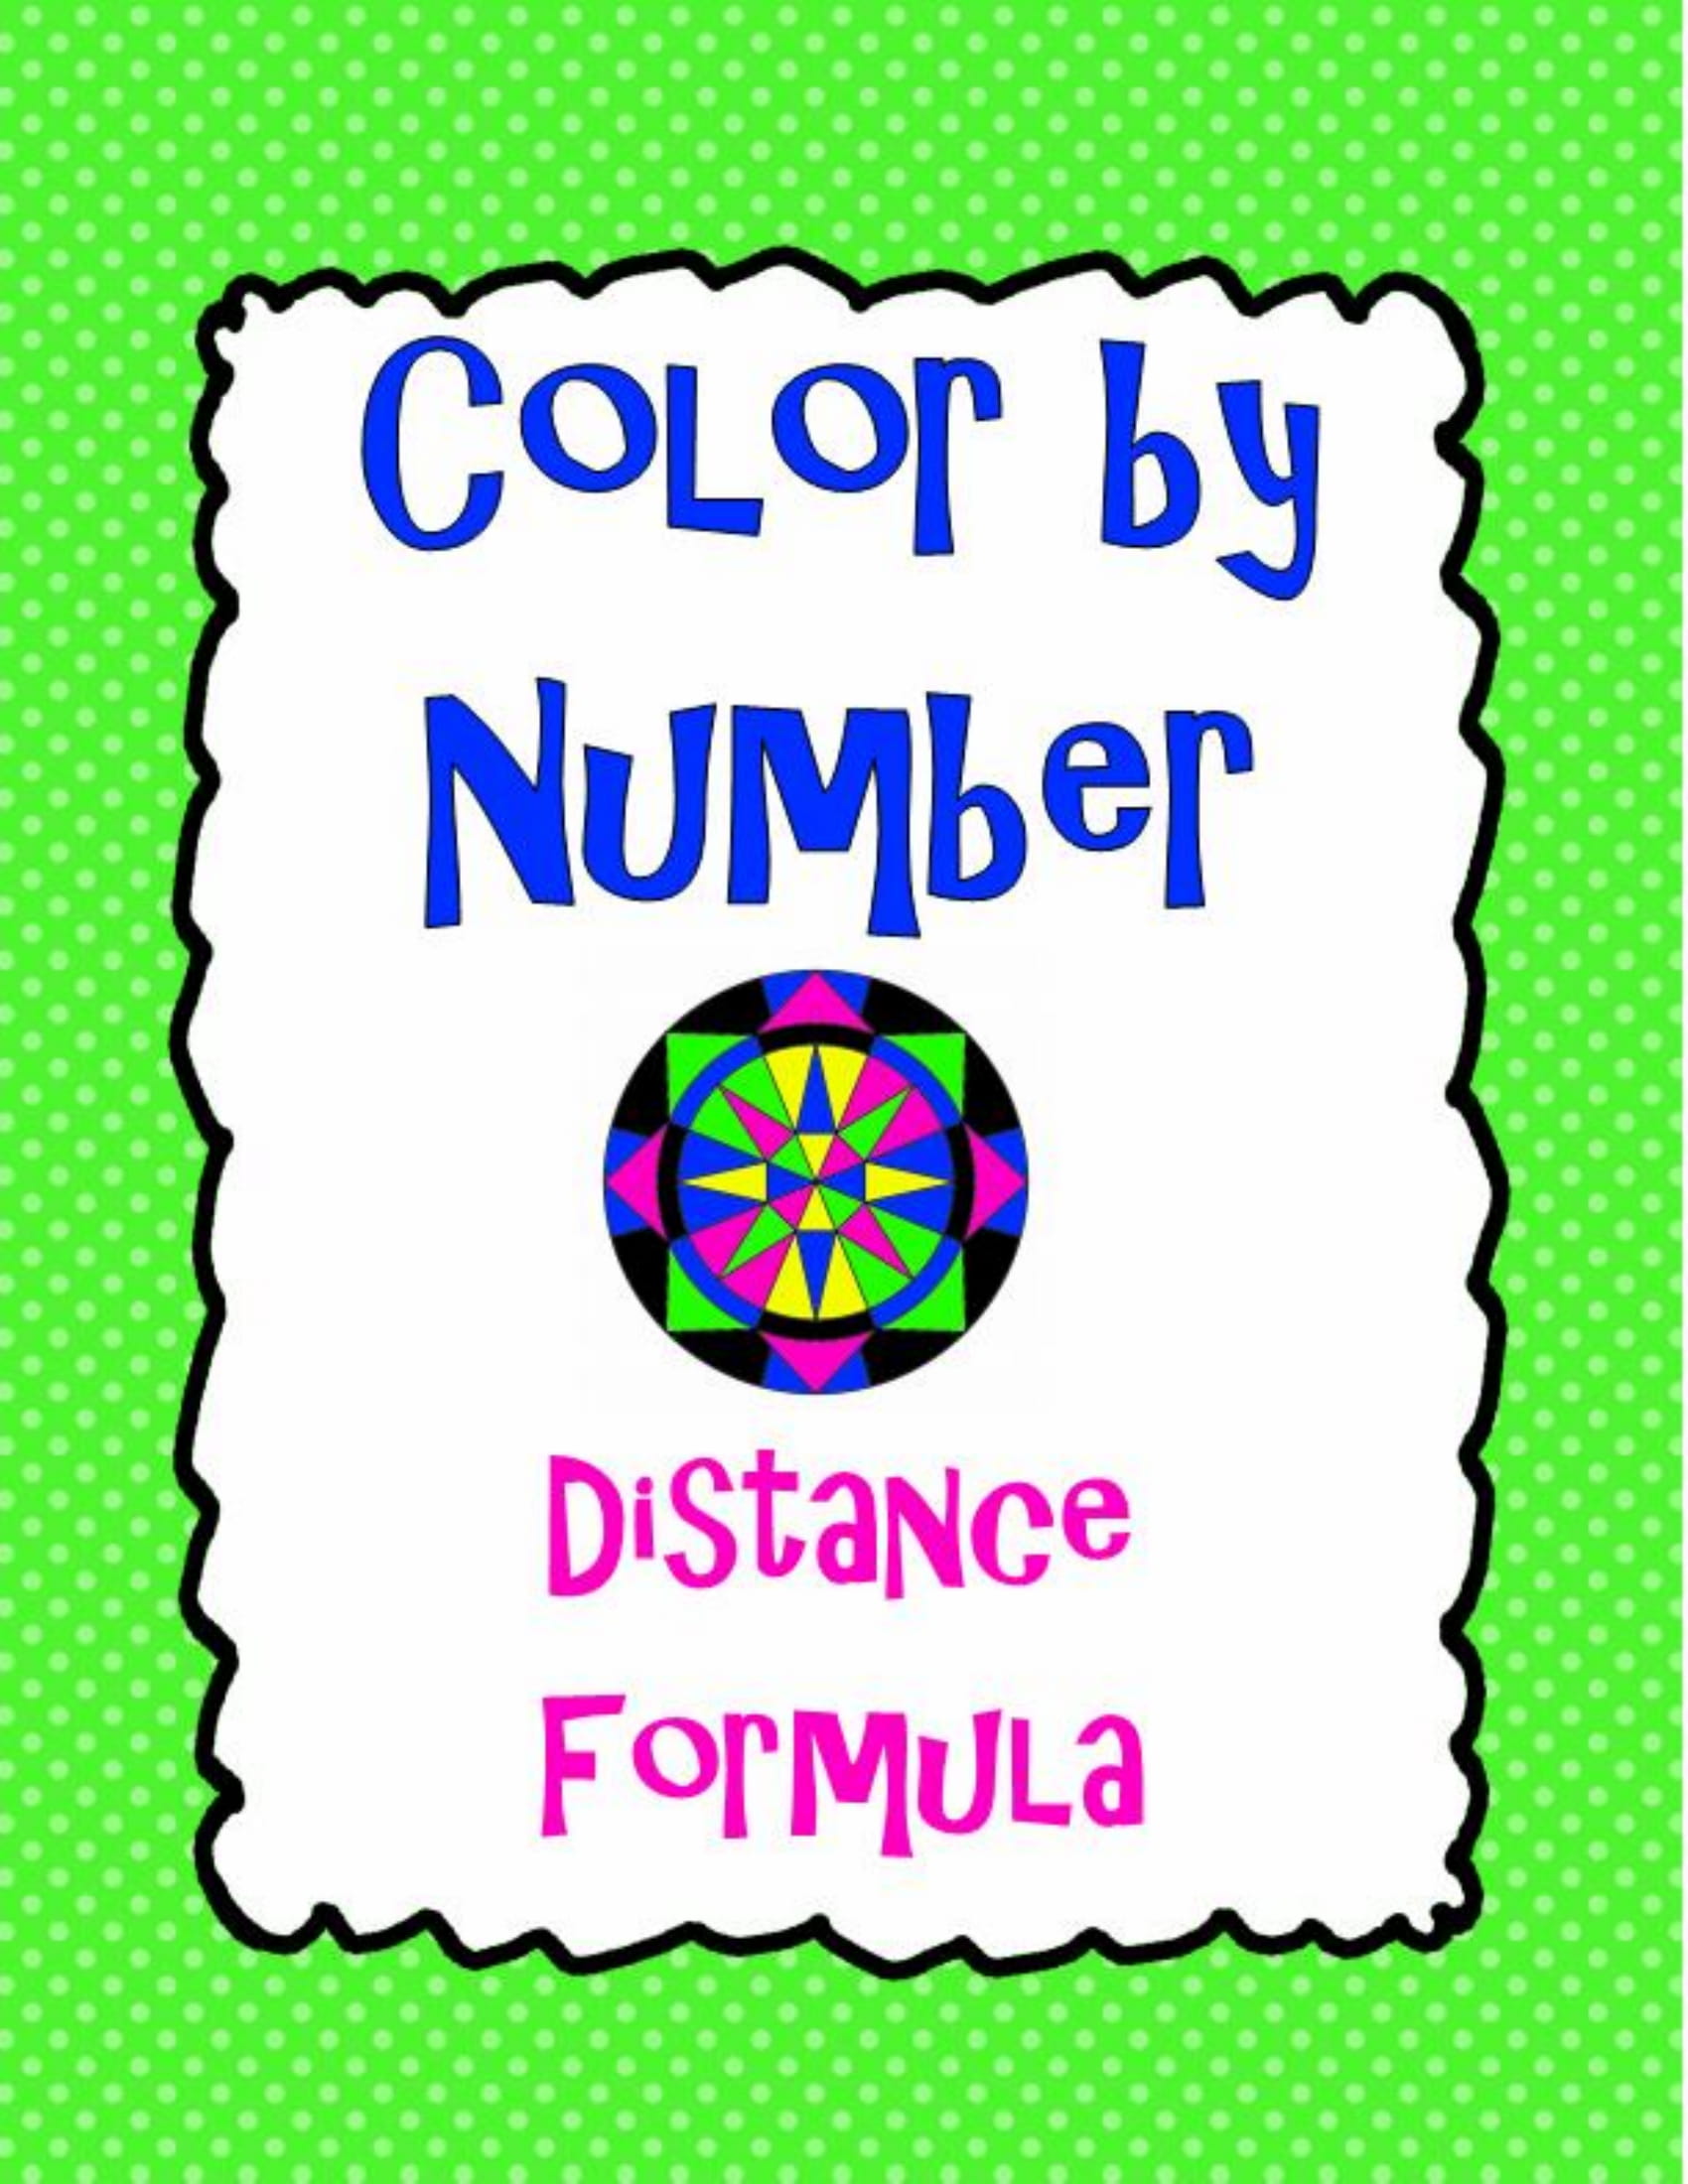 Distance Formula Color By Number Worksheet Answers